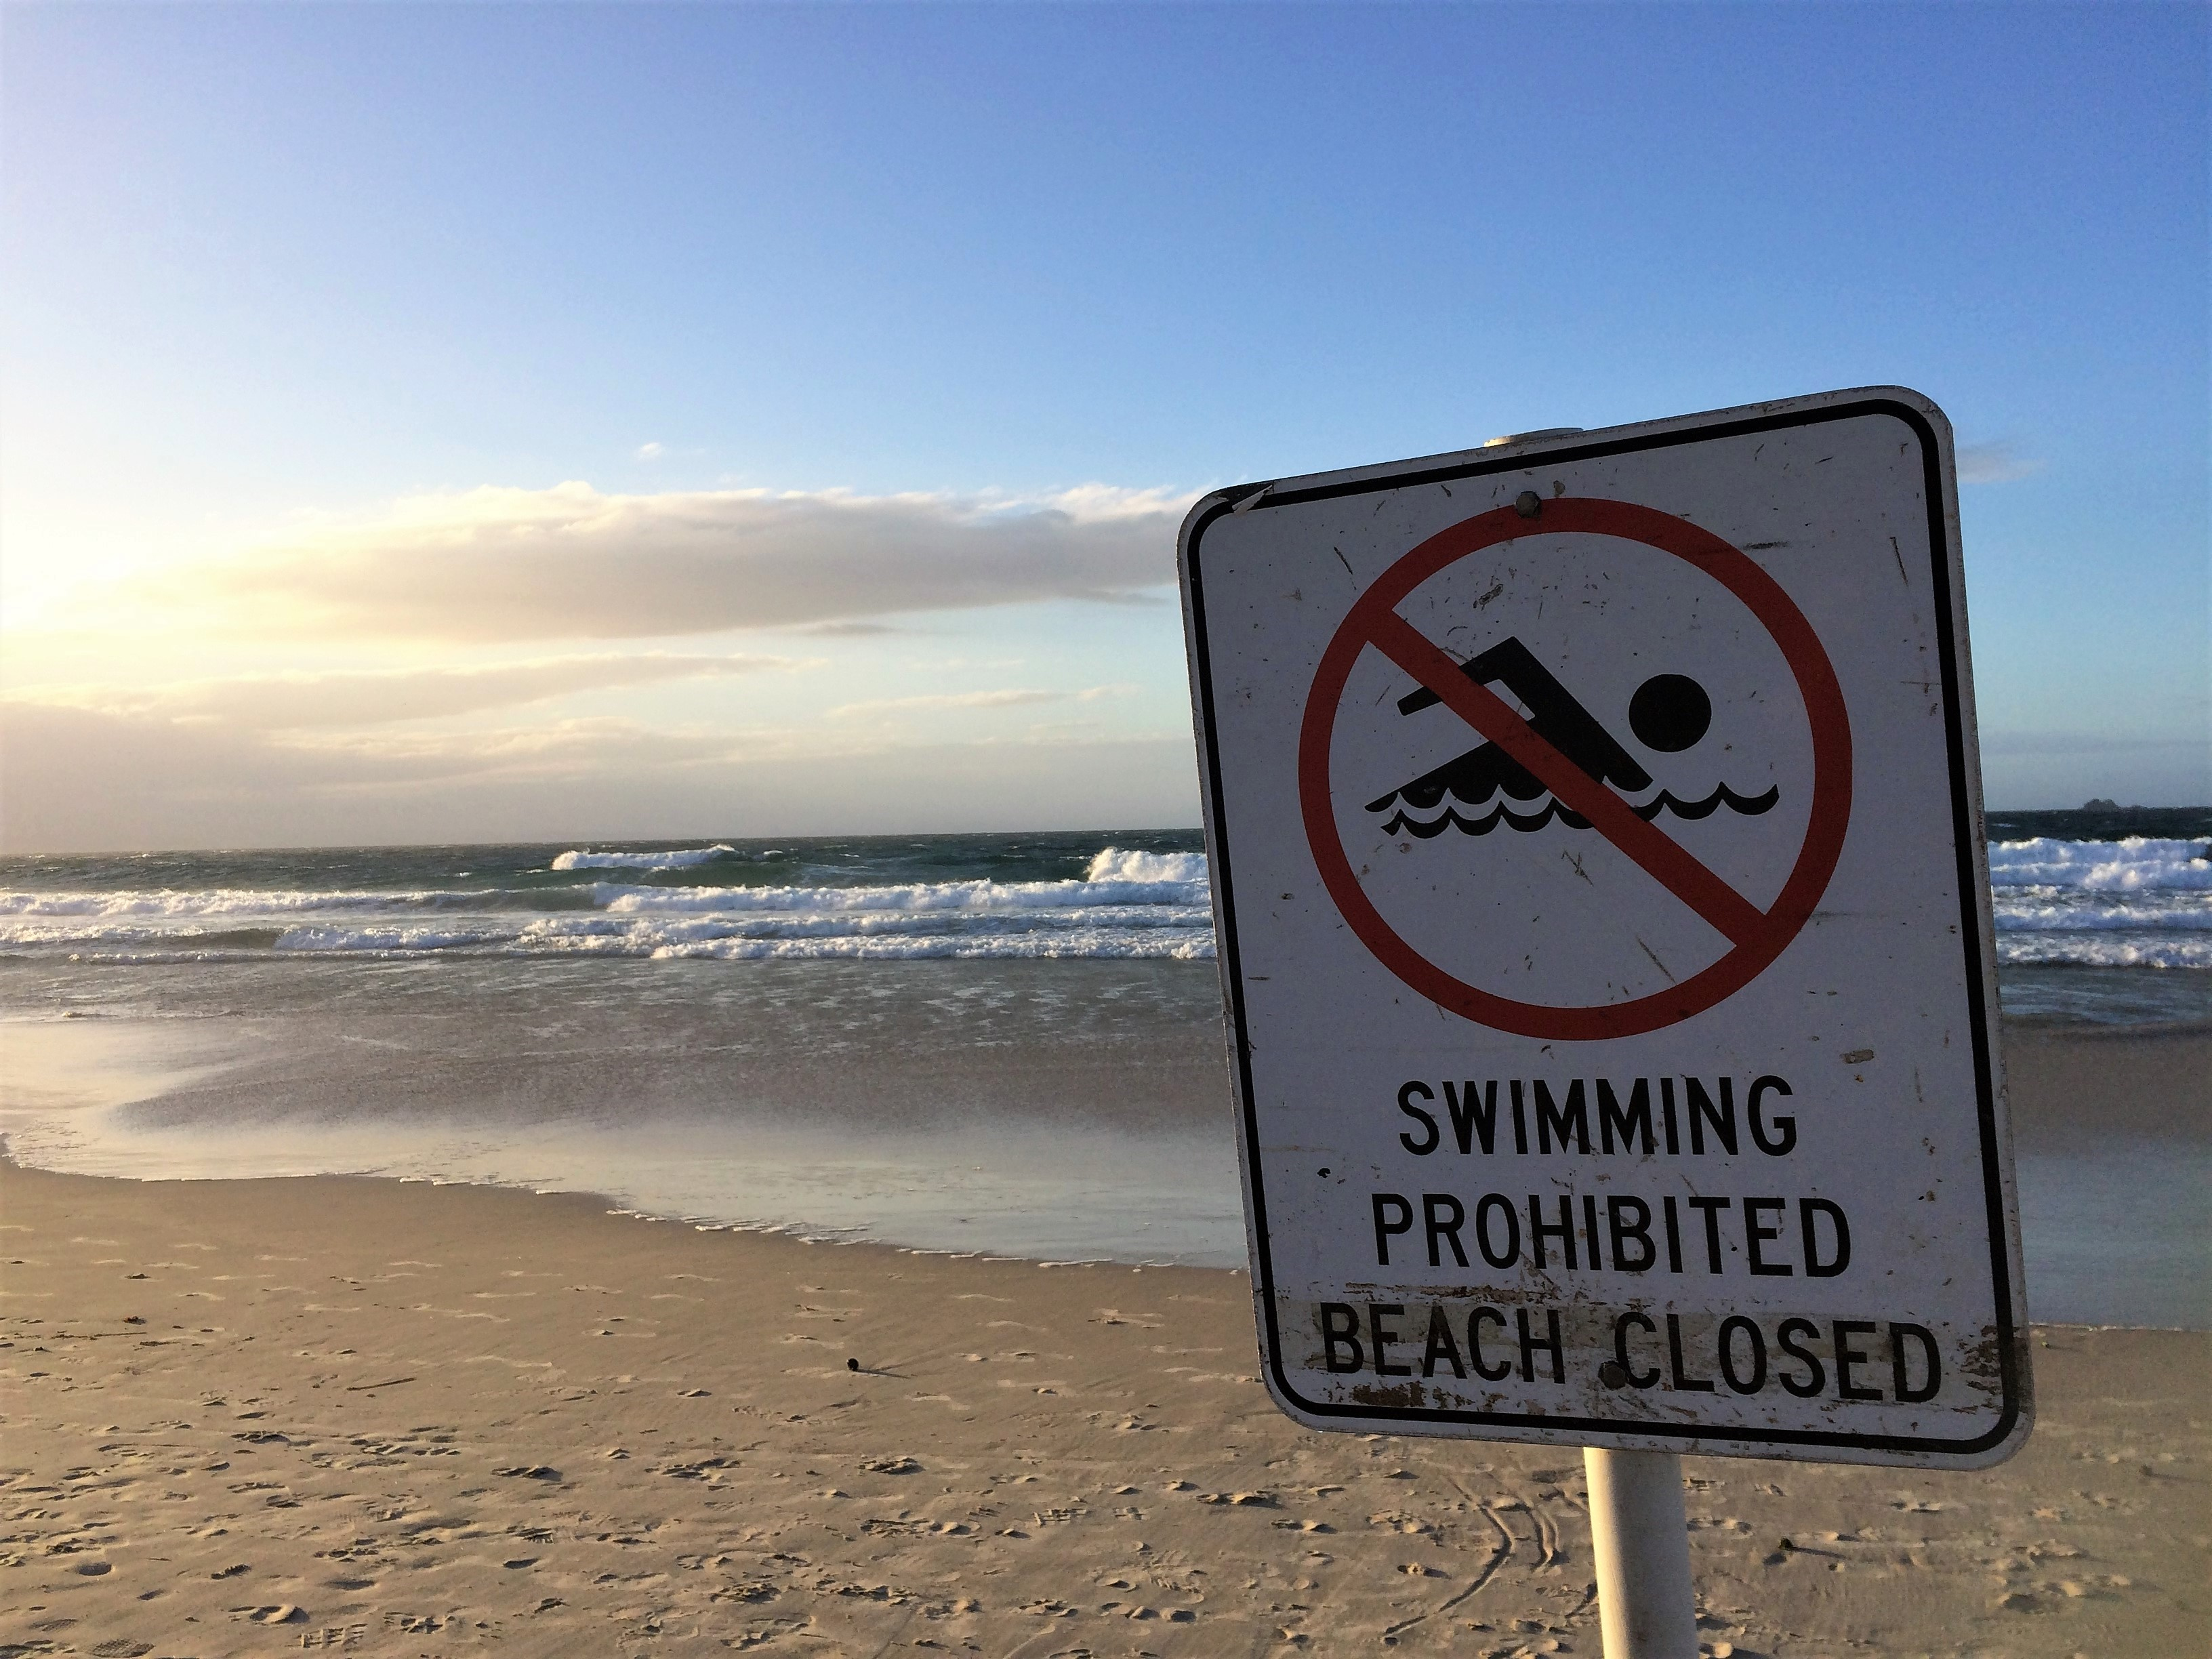 A no swimming sign in front of a beach and body of water